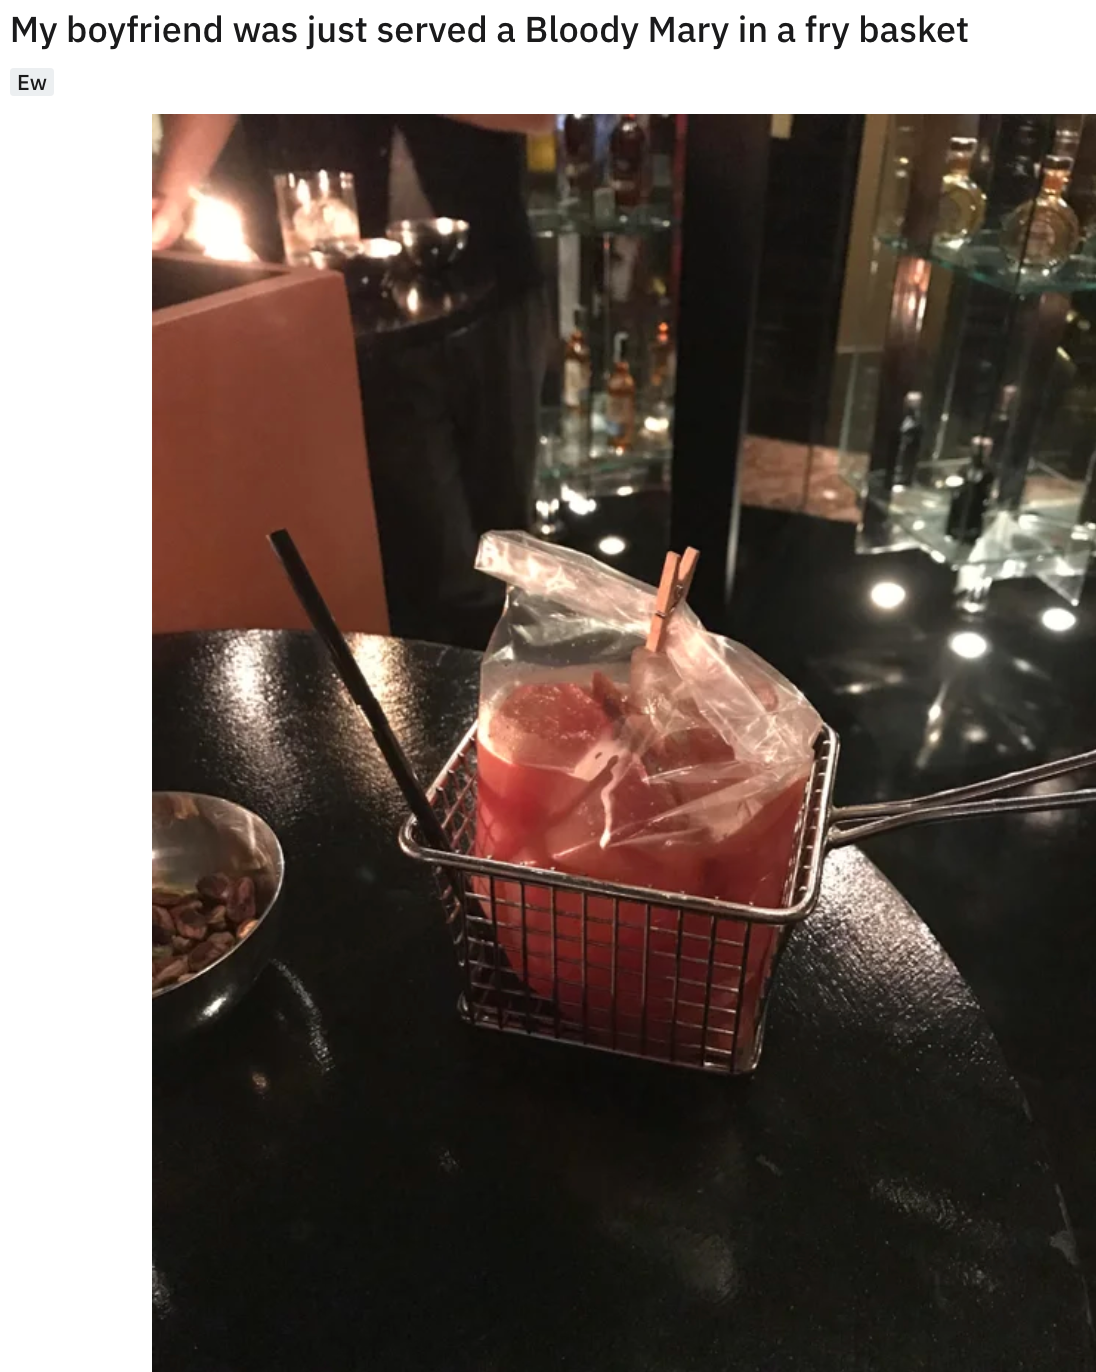 funny food pics - My boyfriend was just served a Bloody Mary in a fry basket